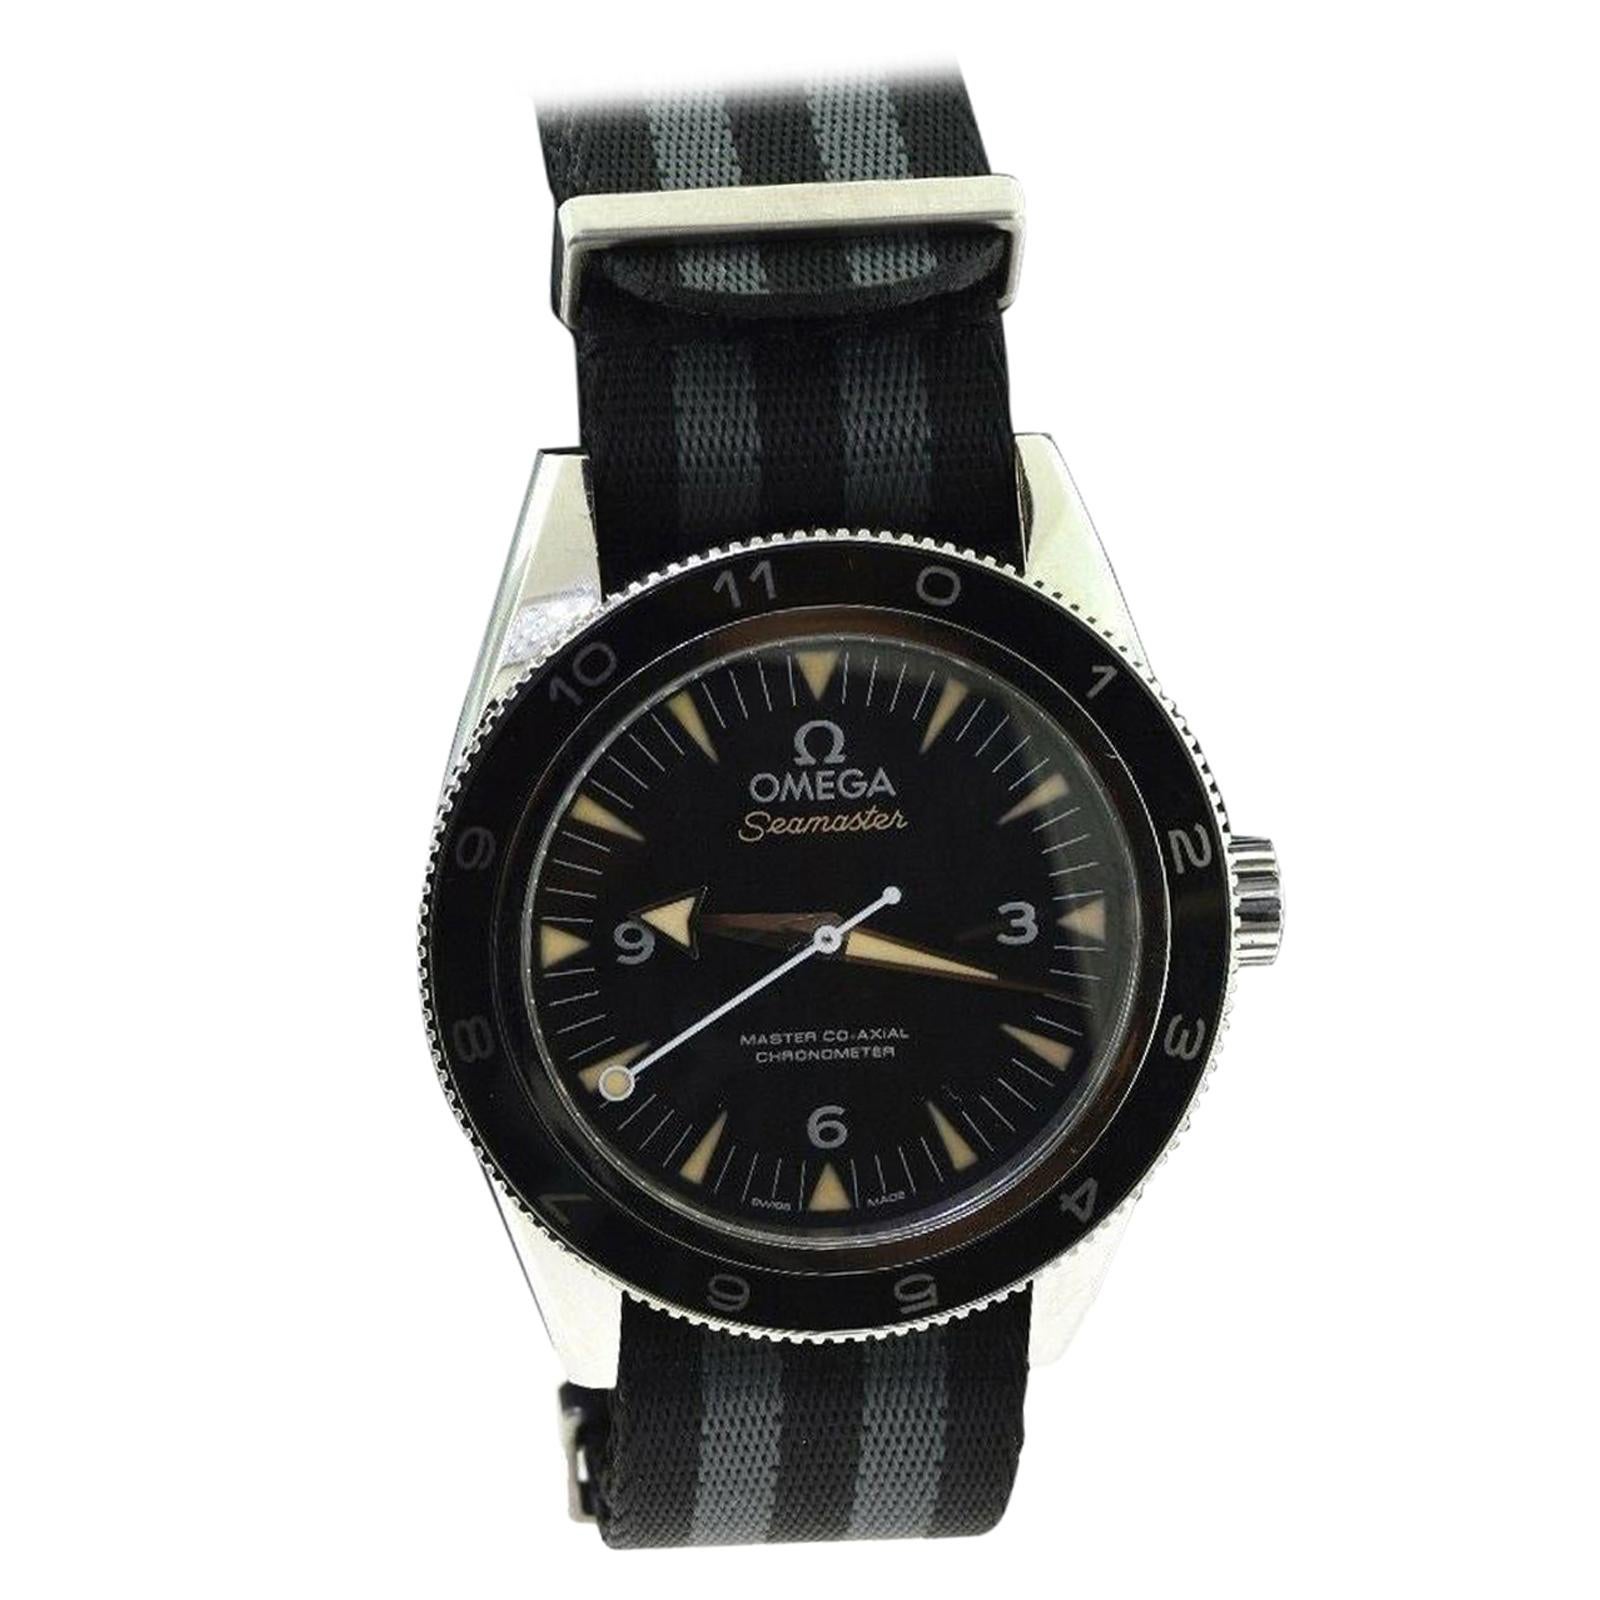 Which Seamaster does James Bond wear?